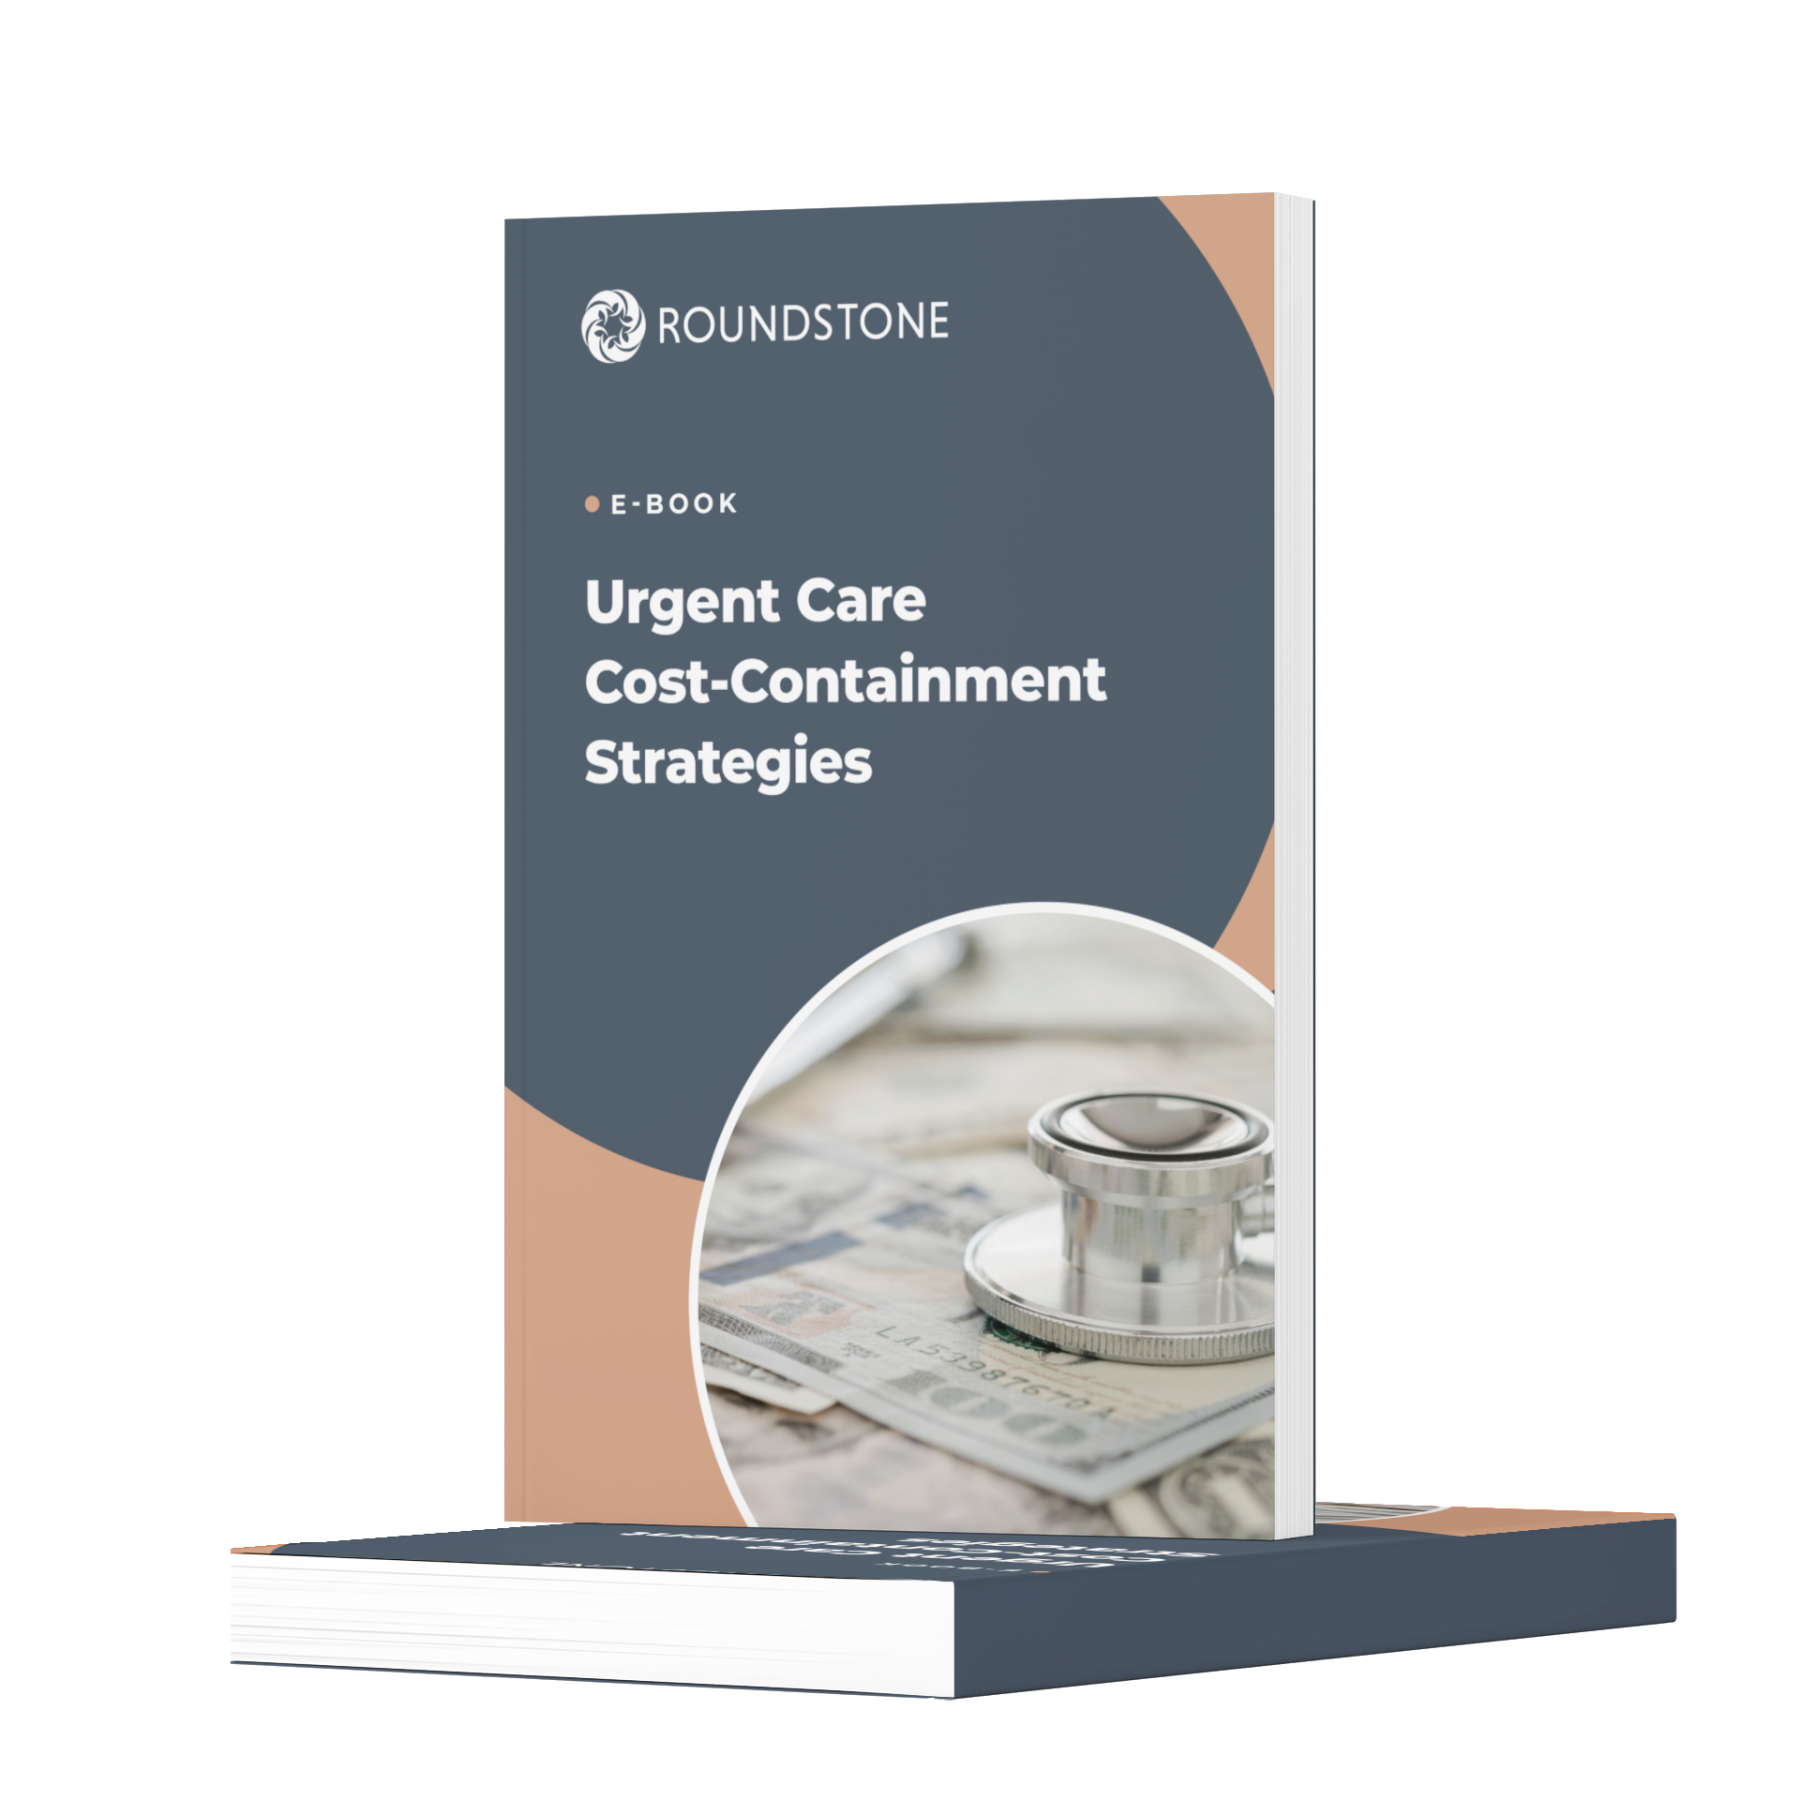 Urgent-Care-Cost-Containment-Strategies-eBook-Mockup 2